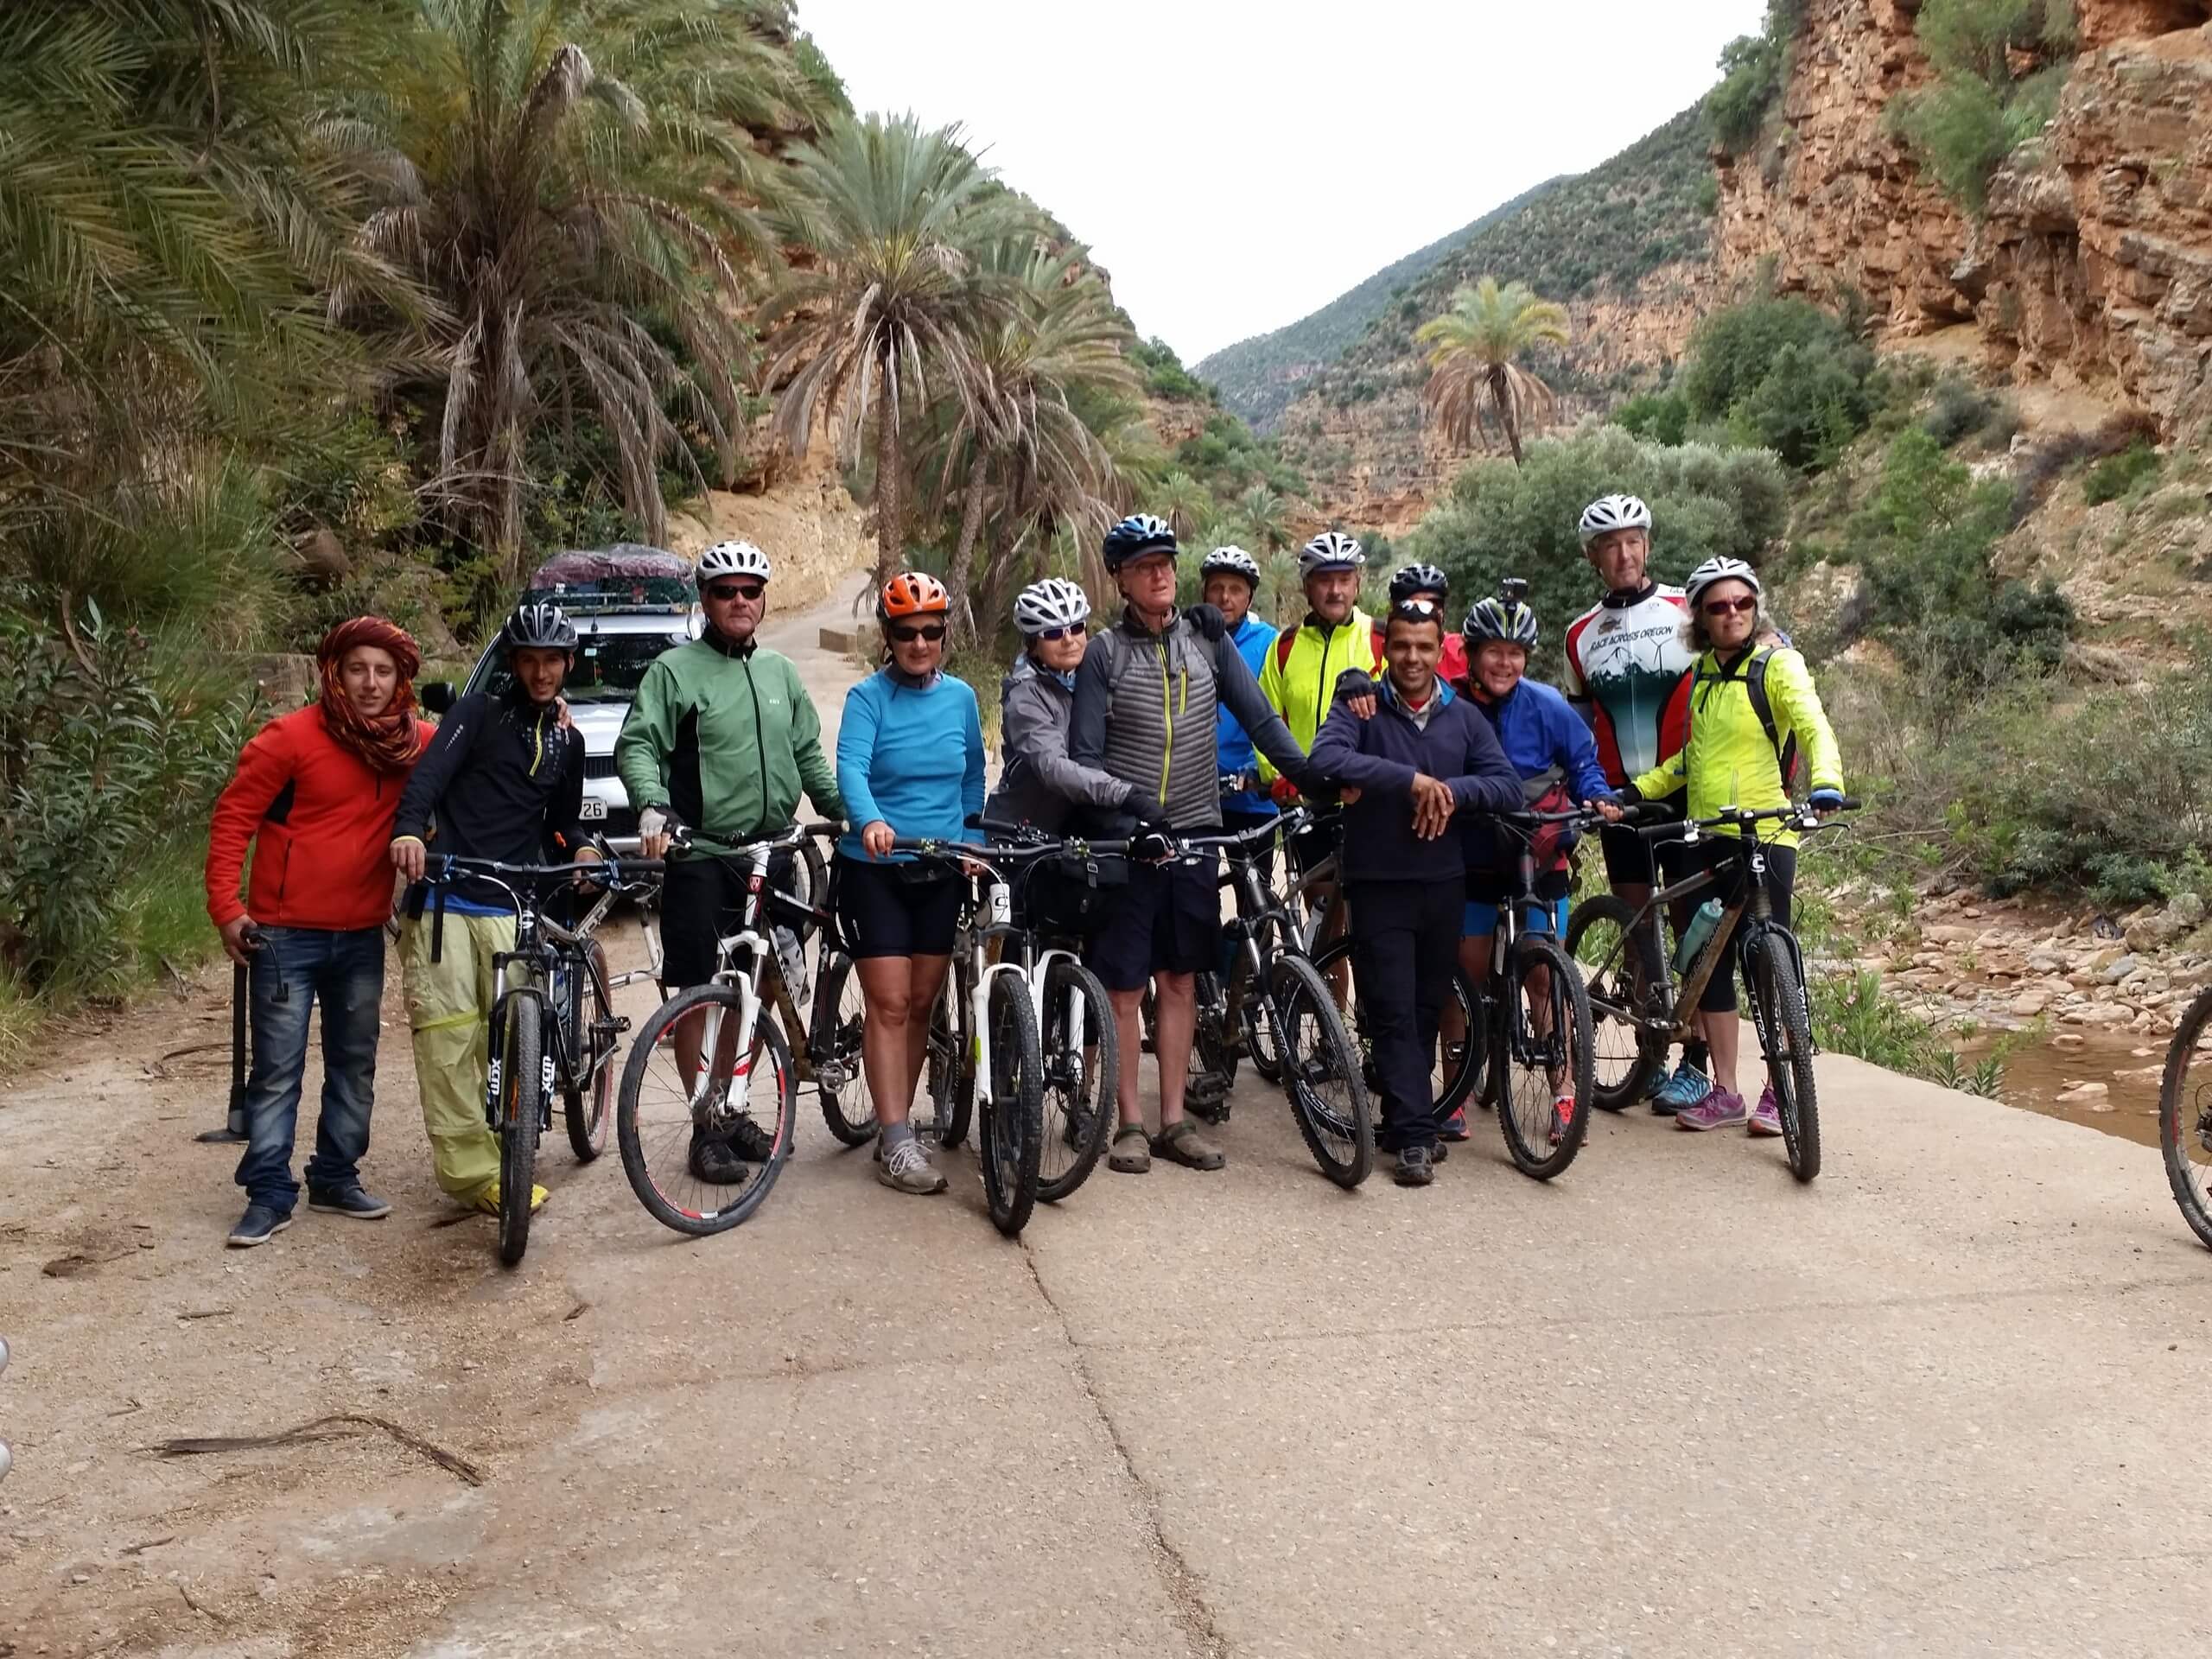 Group of mountain bikers posing on a gravel road in Morocco